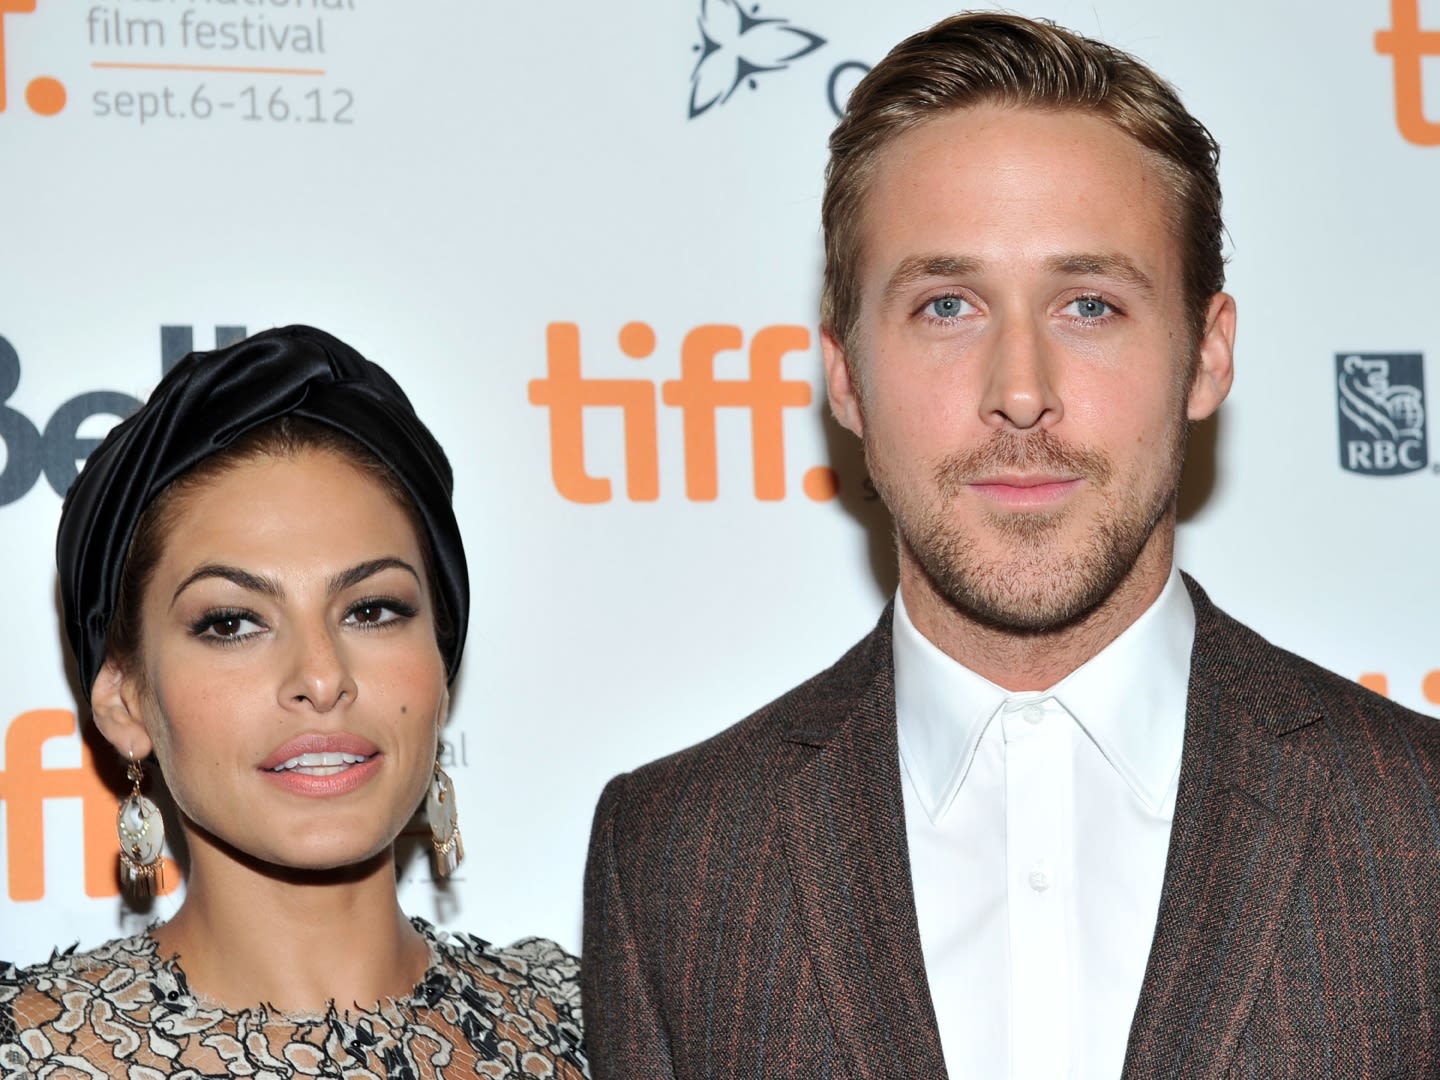 Eva Mendes Just Sent Fans of Her & Ryan Gosling’s Romance Wild With a One-Word Response